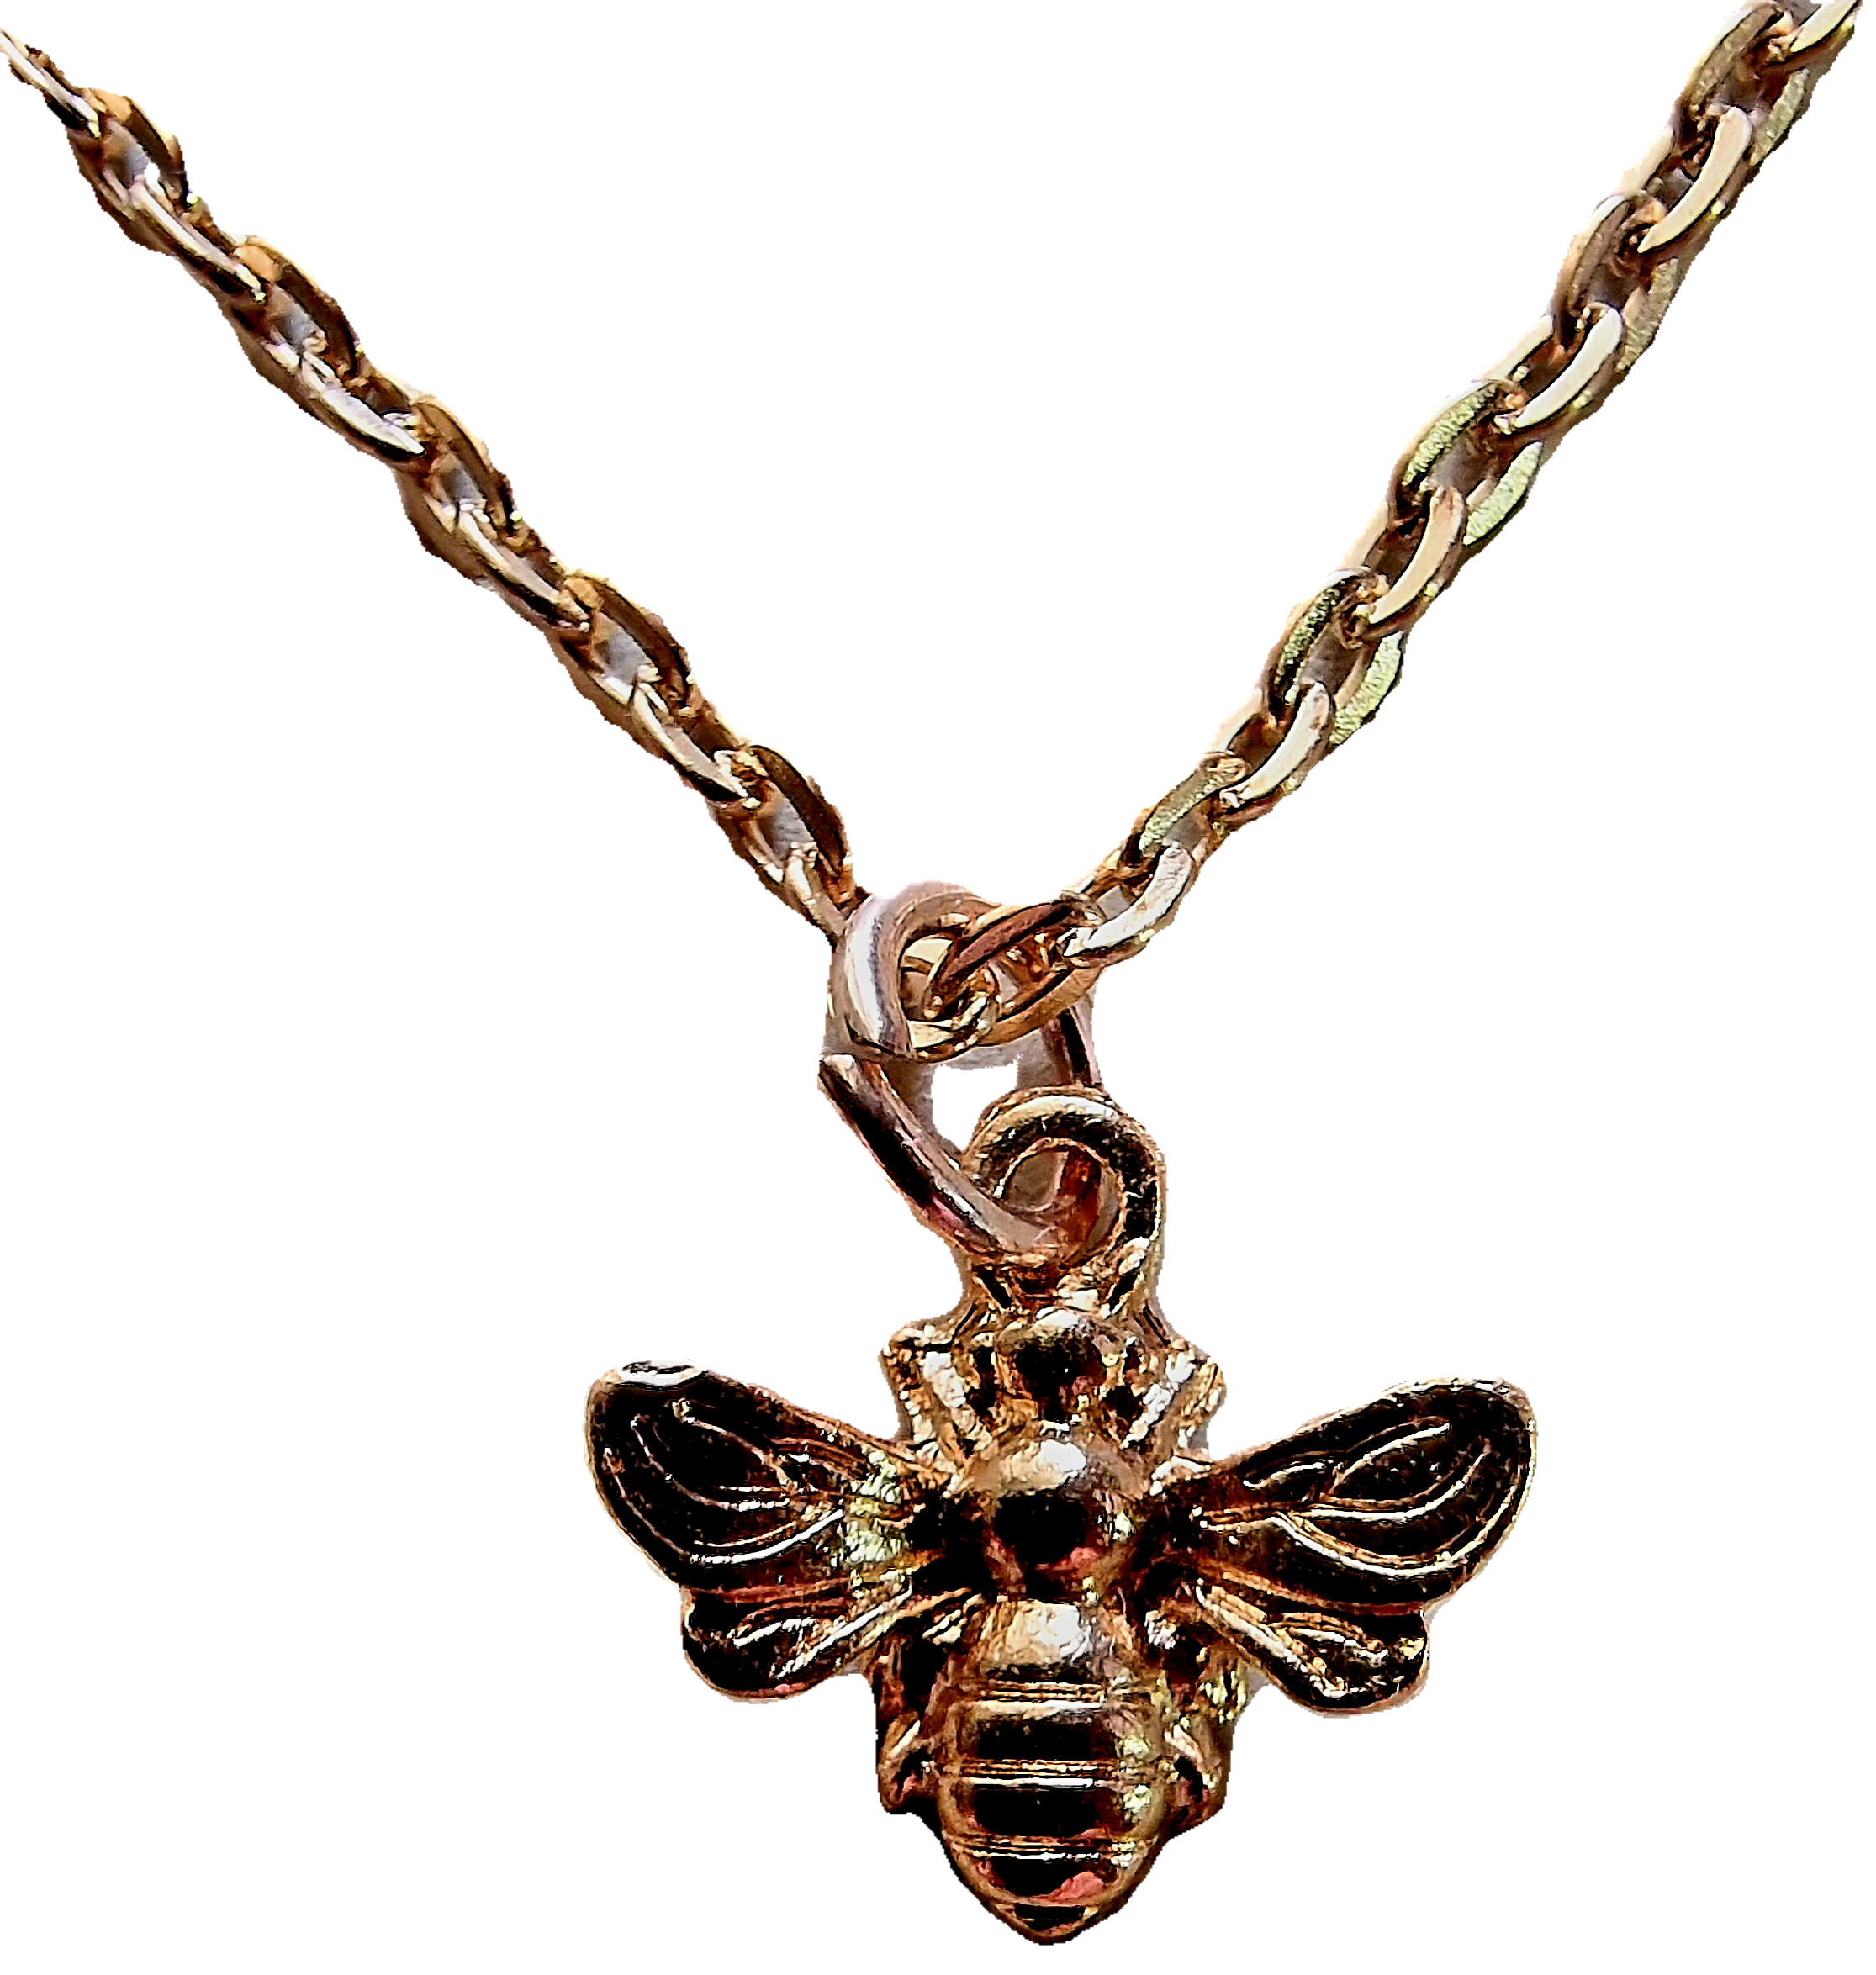 Bee Necklace - Gold plated